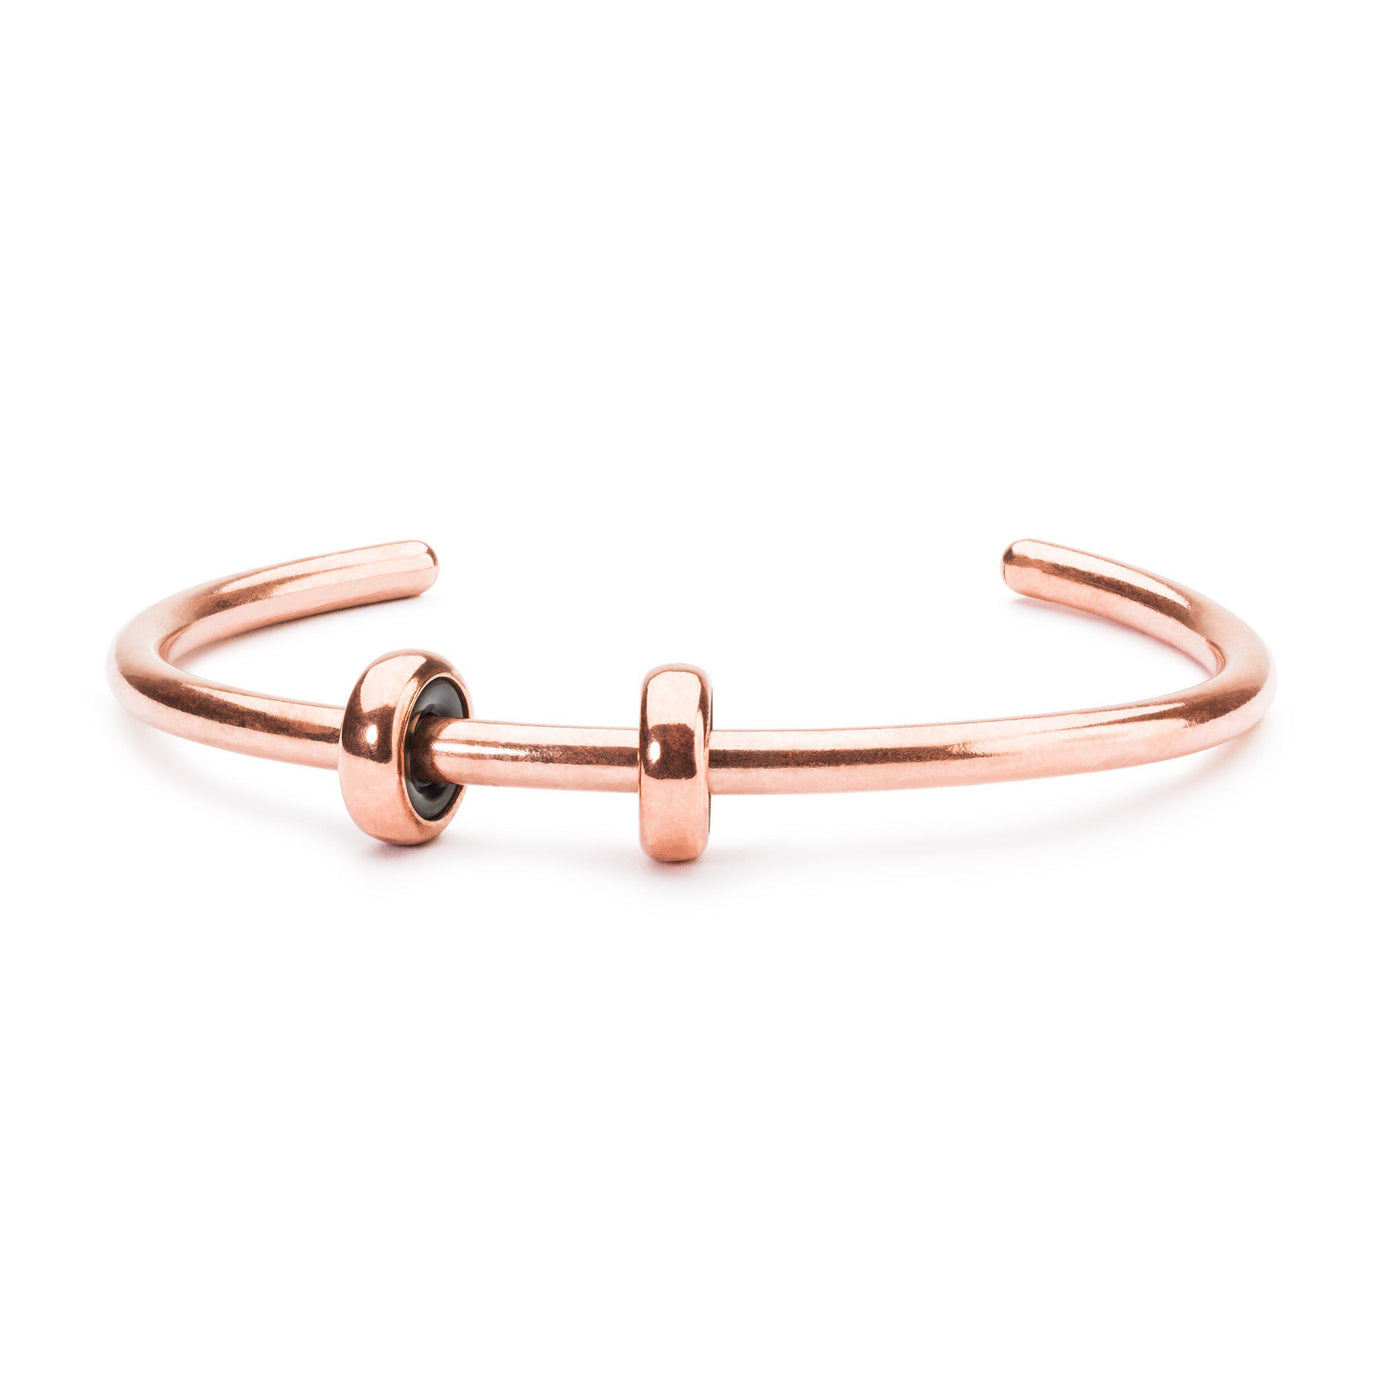 Copper Bangle with 2 x Copper Spacers - Trollbeads Canada